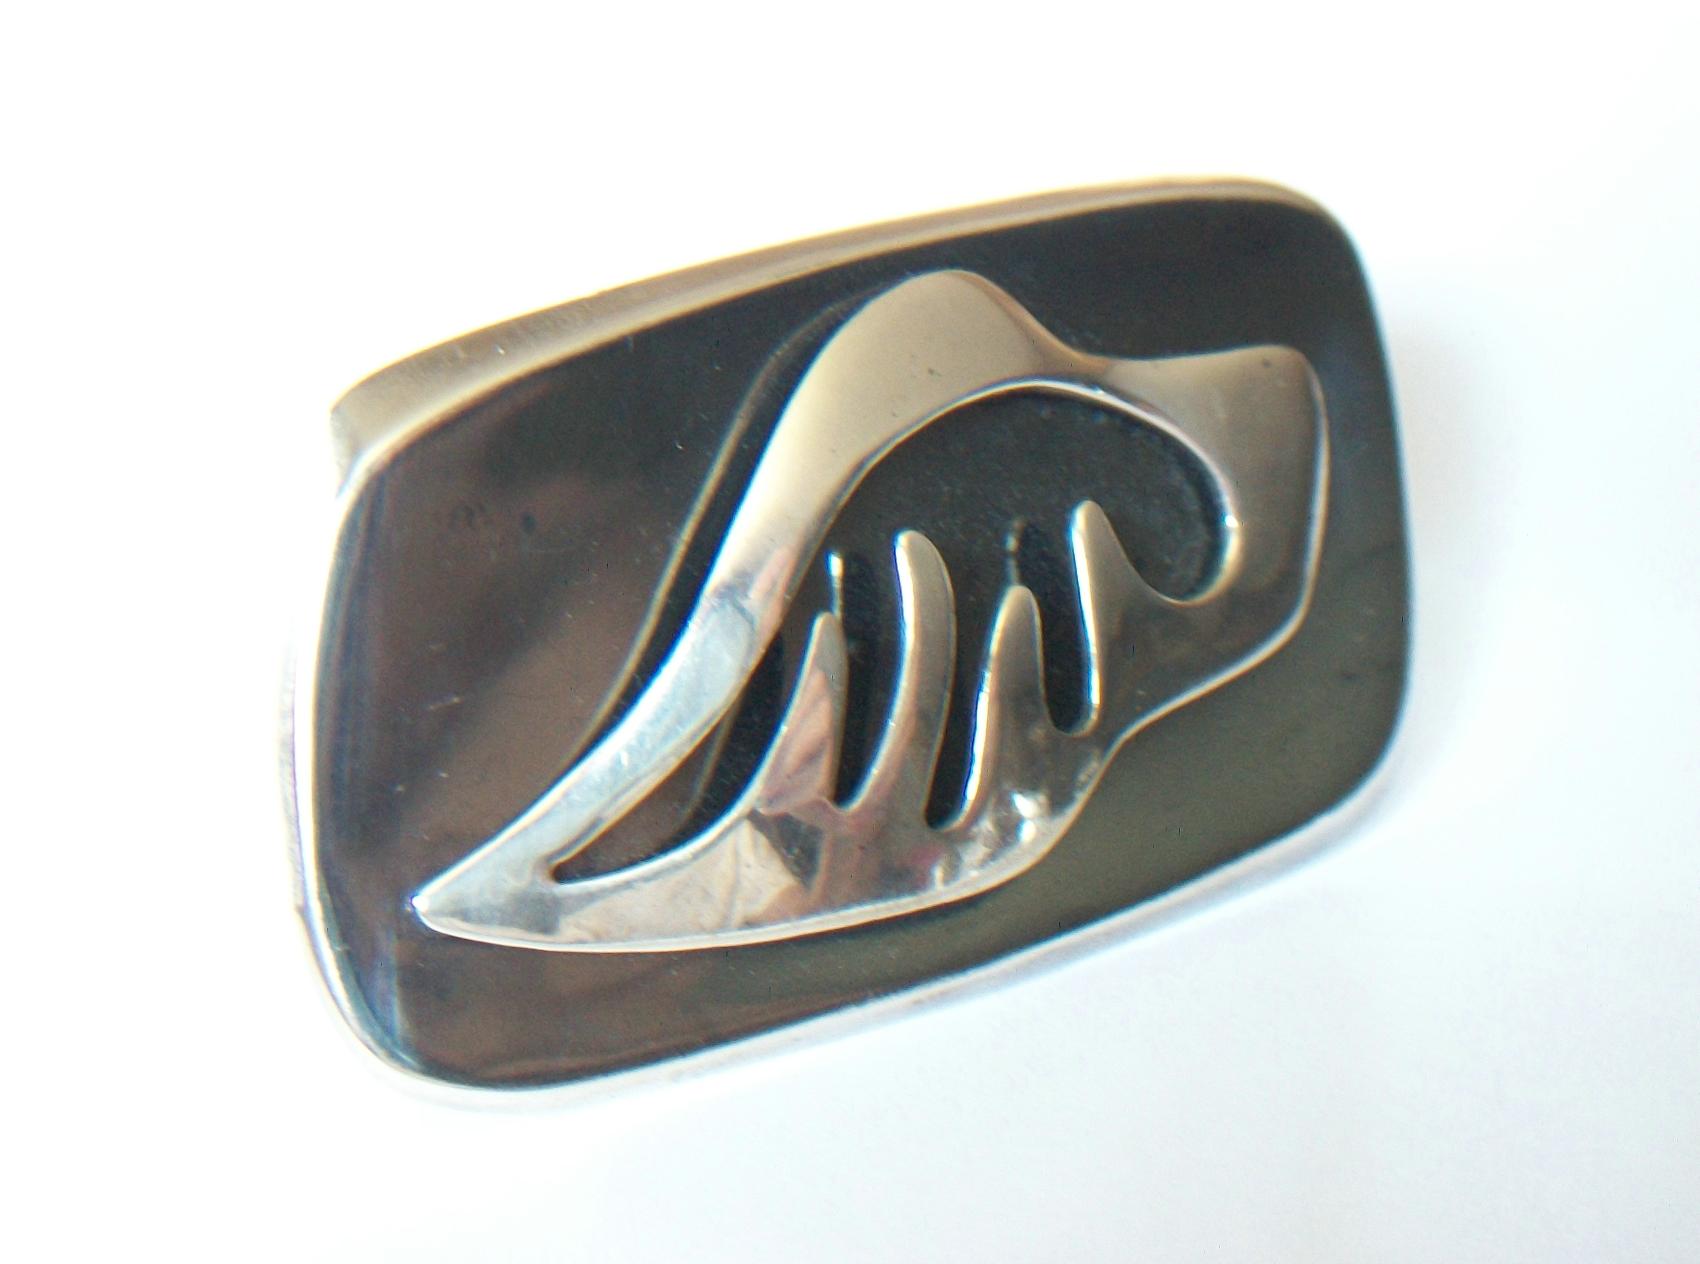 ALFREDO VILLASANA (Designer/Maker) - Modernist sterling silver brooch - hand made - sculptural details - signed on the back - 925/1000 - Mexico (Taxco) - circa 1950's.

Excellent vintage condition - all original - tarnishing, minor wear and surface